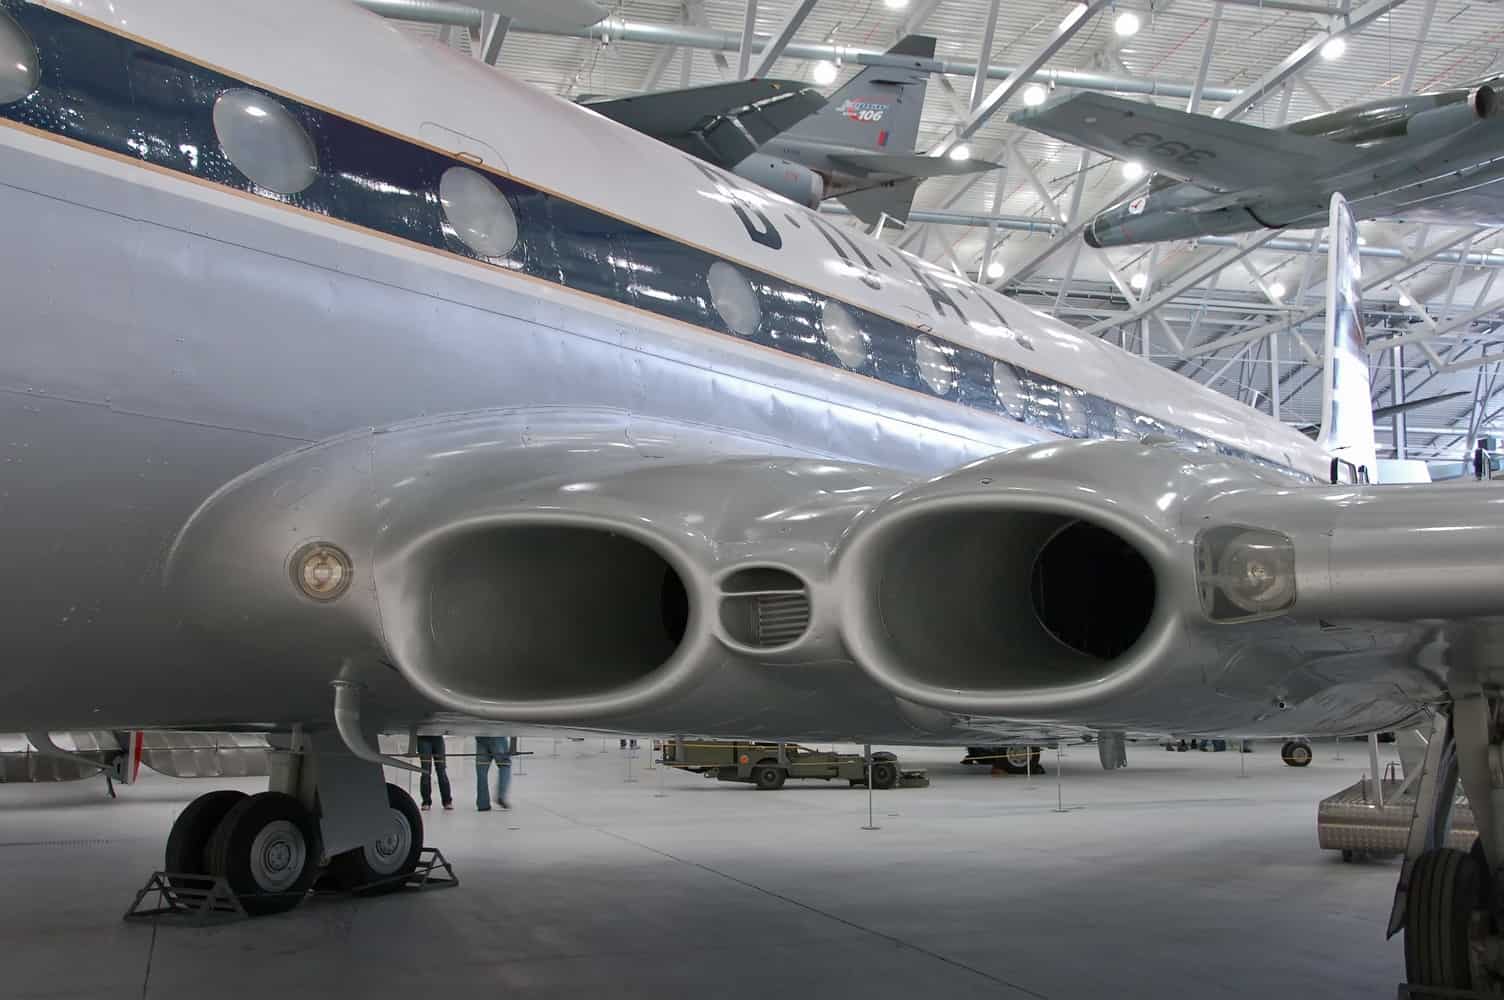 The de Havilland comet featured engines integrated into its airframe in the 1950s